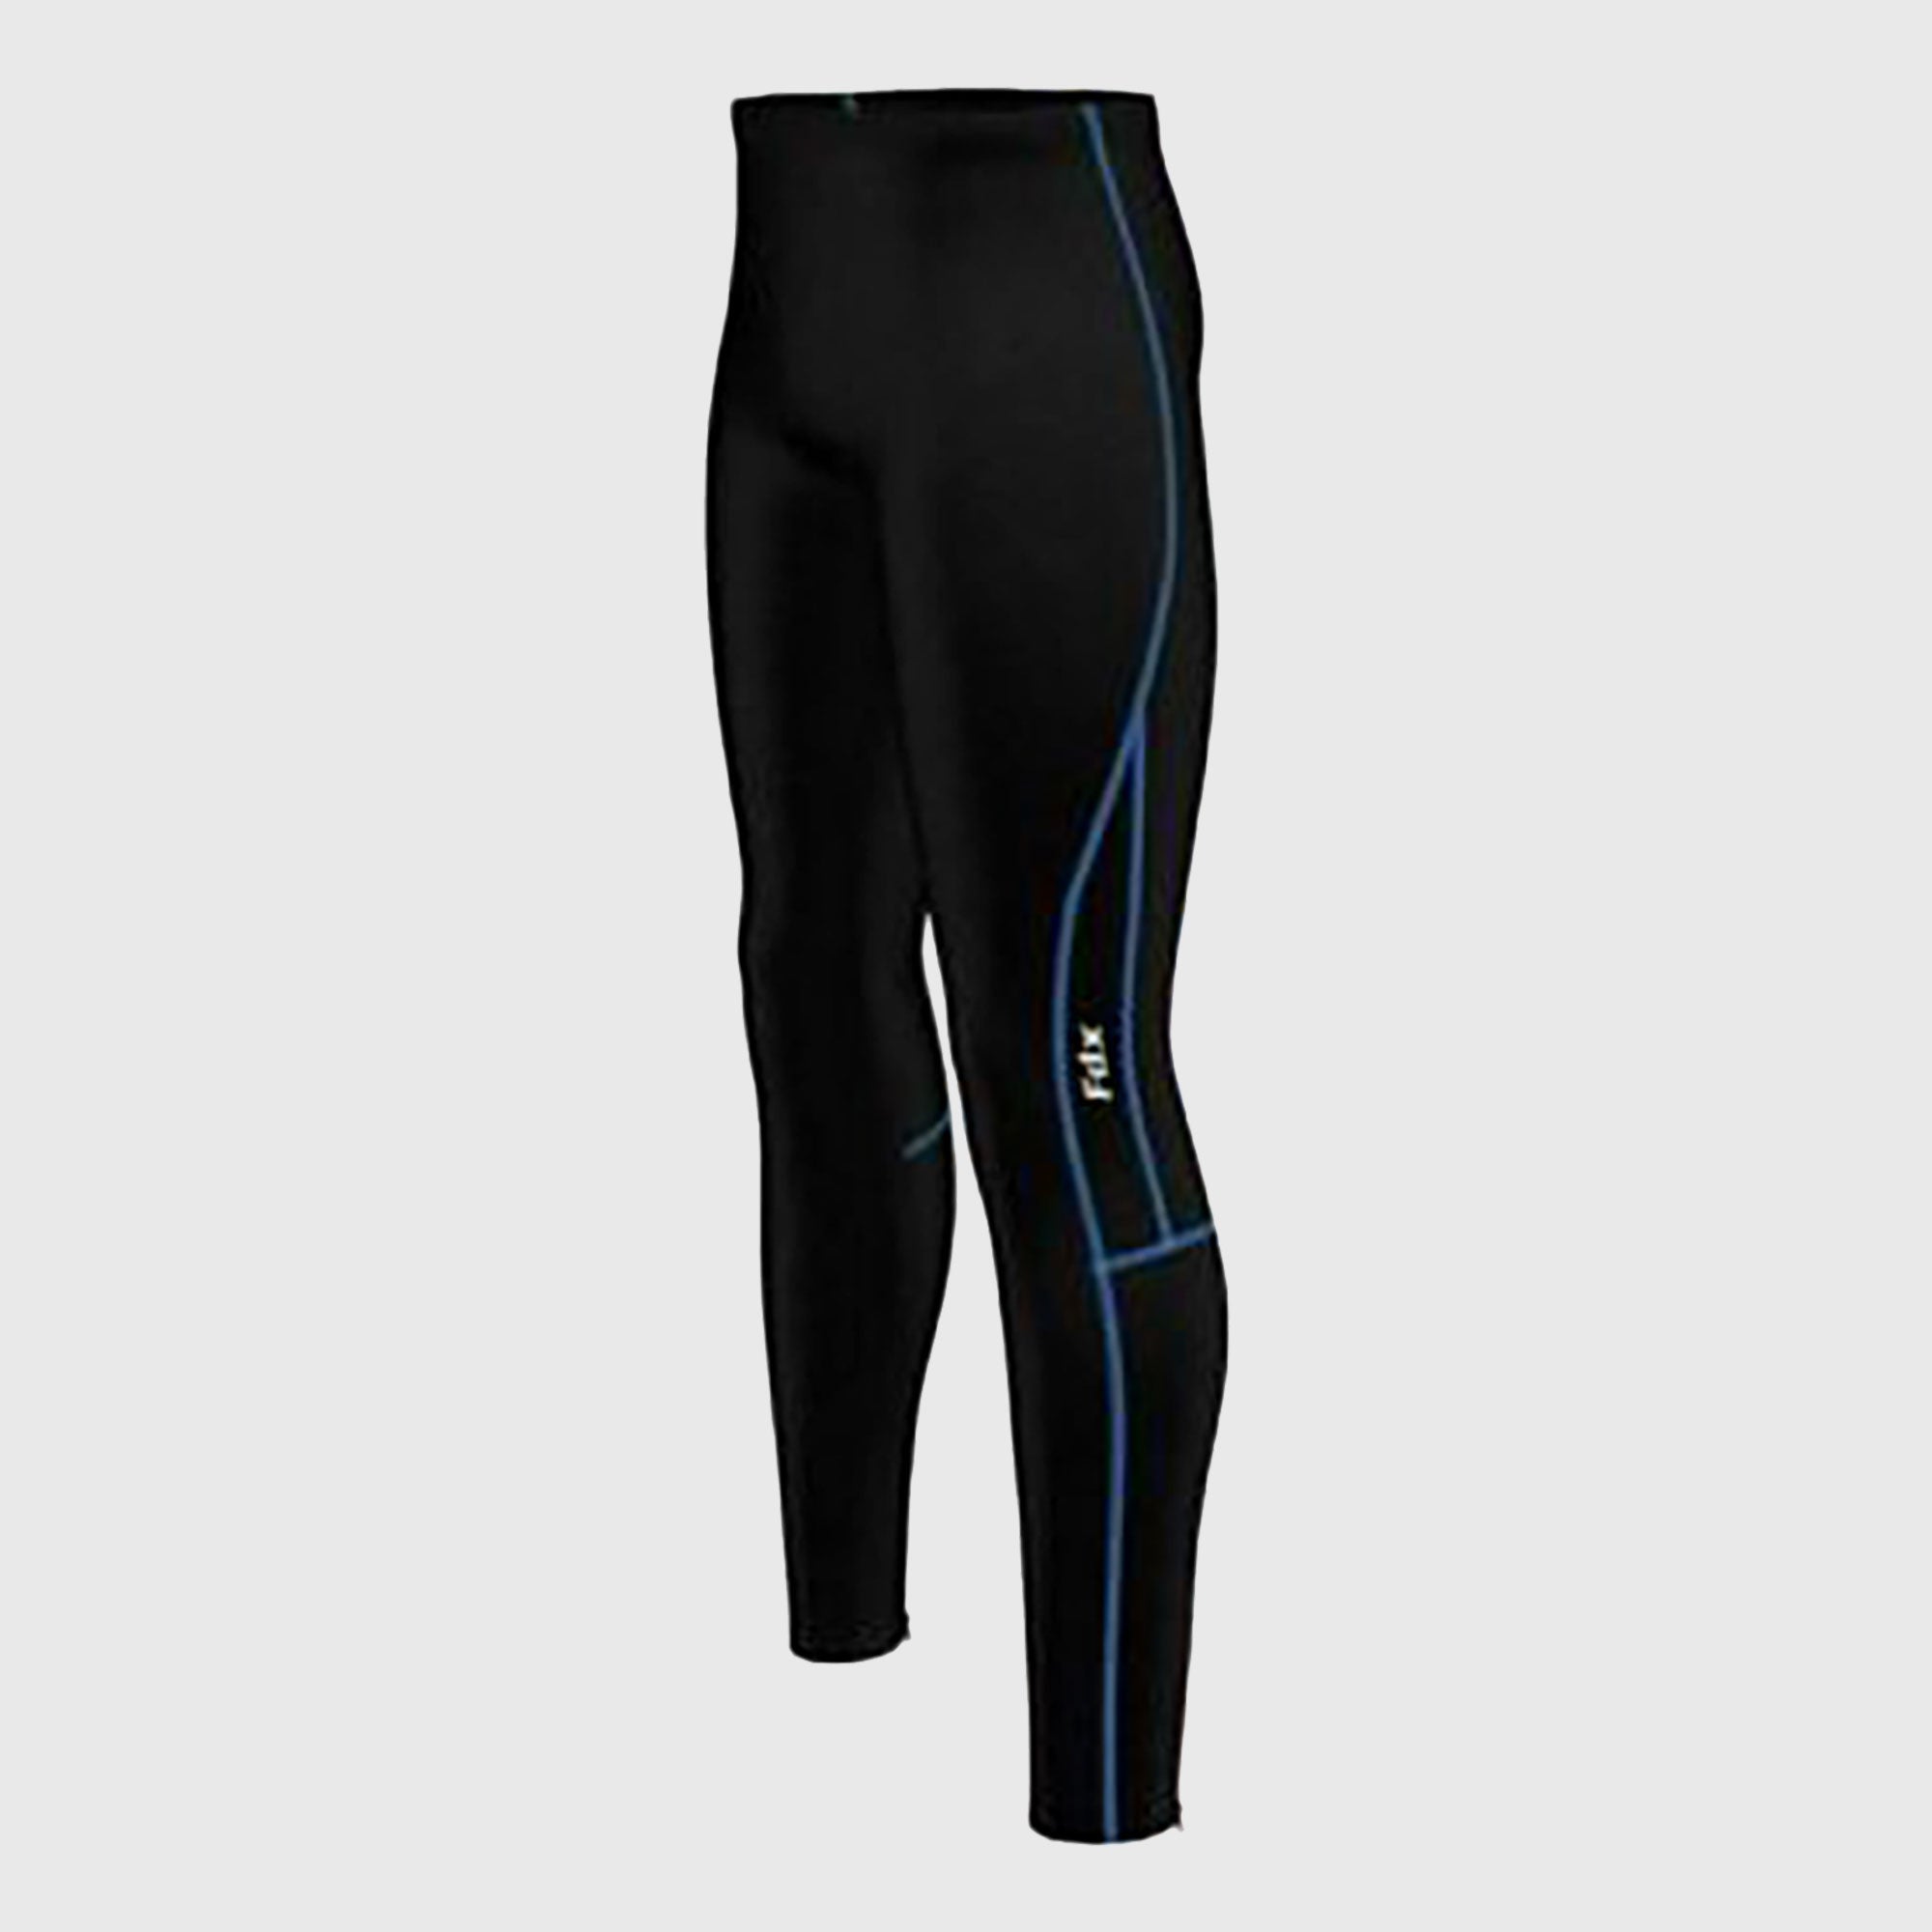 Related: Blue Men 2 Cycling Tights